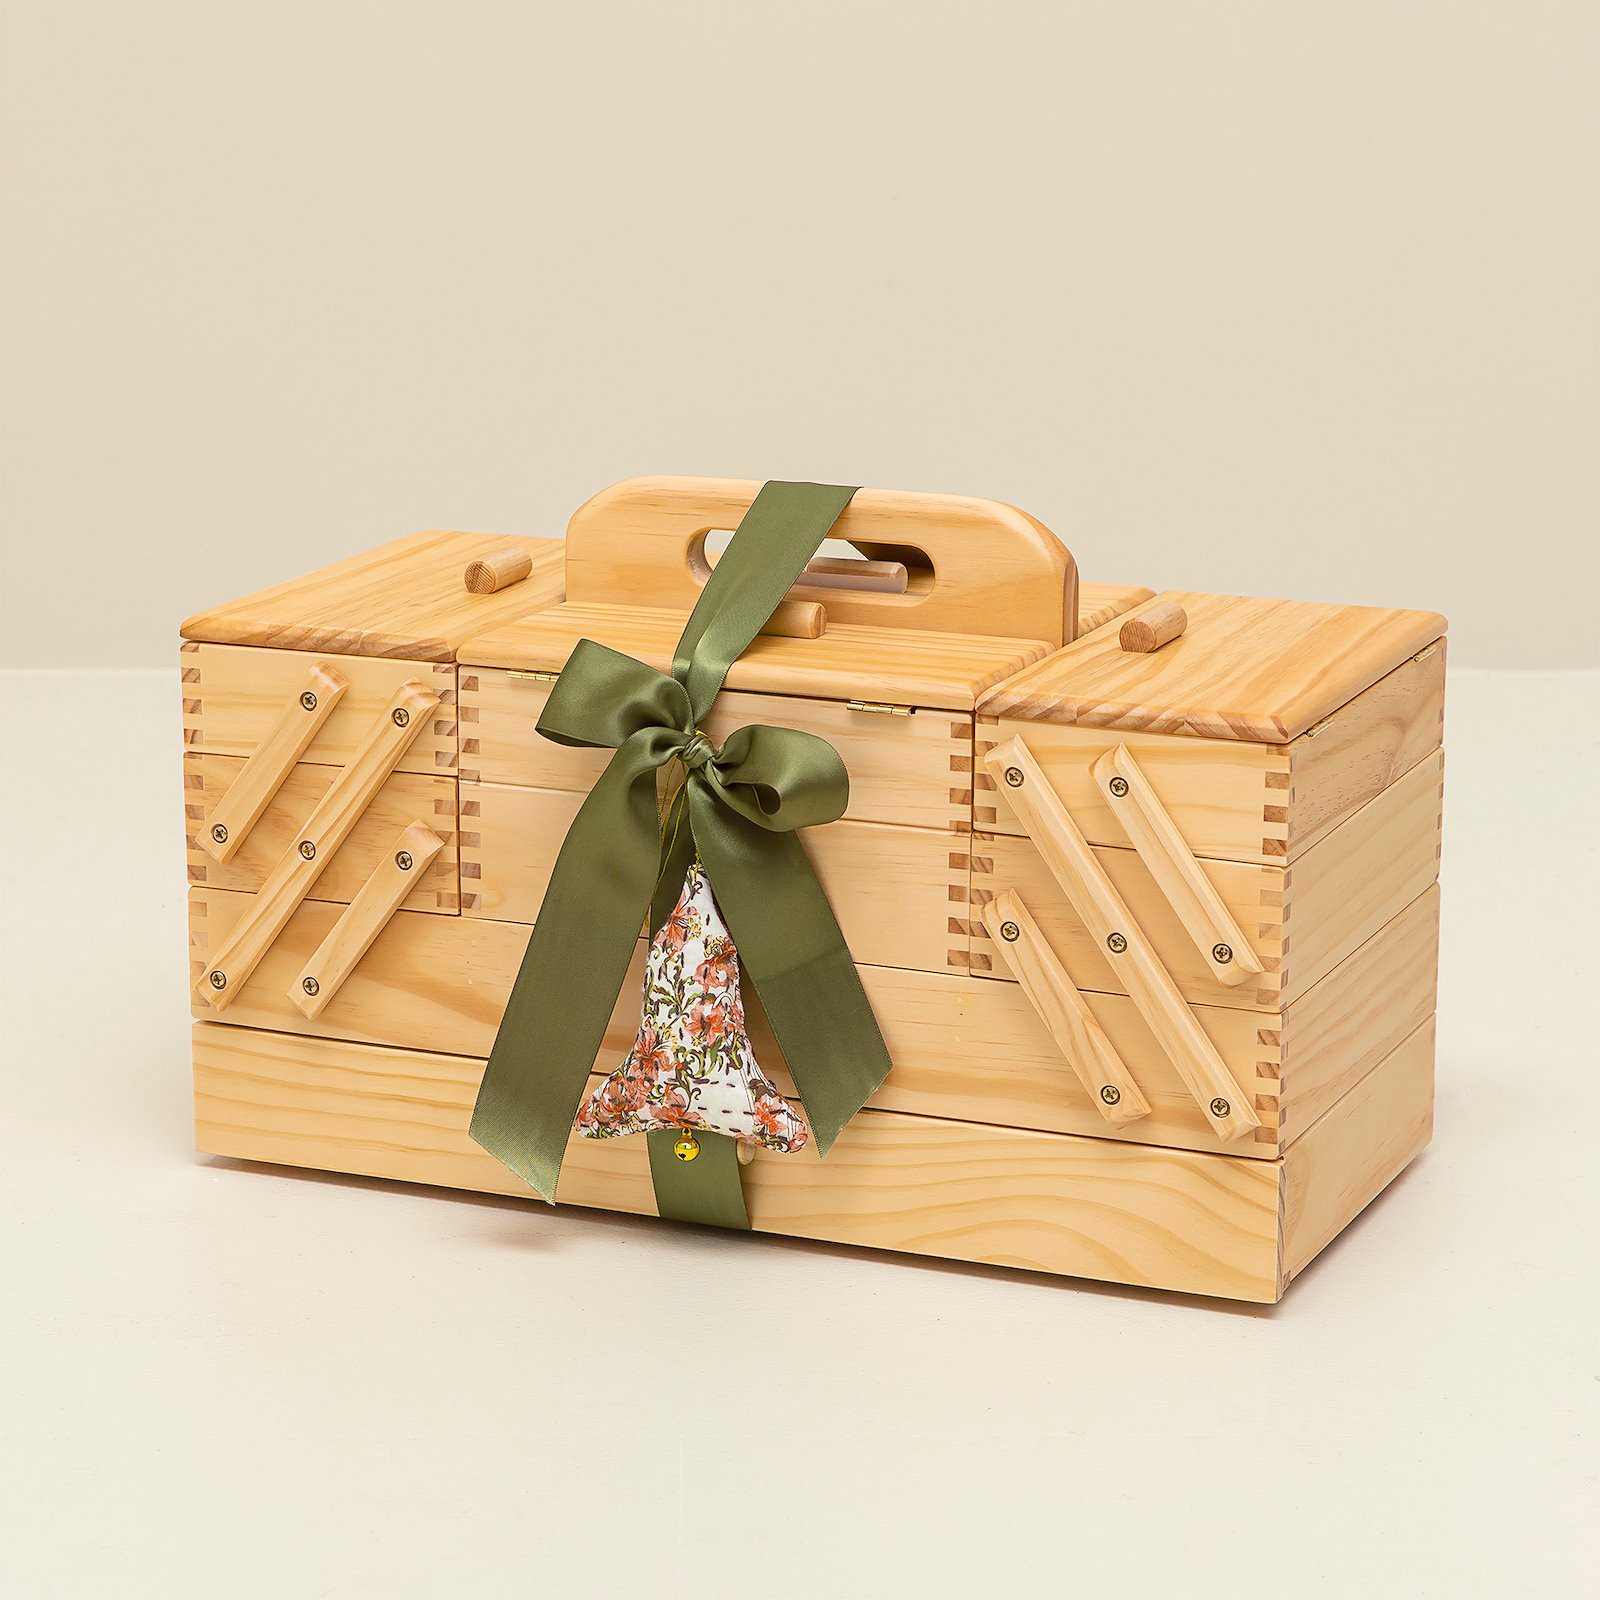 Sewing box wood lacquered 23x45x21cm 46273_sskit